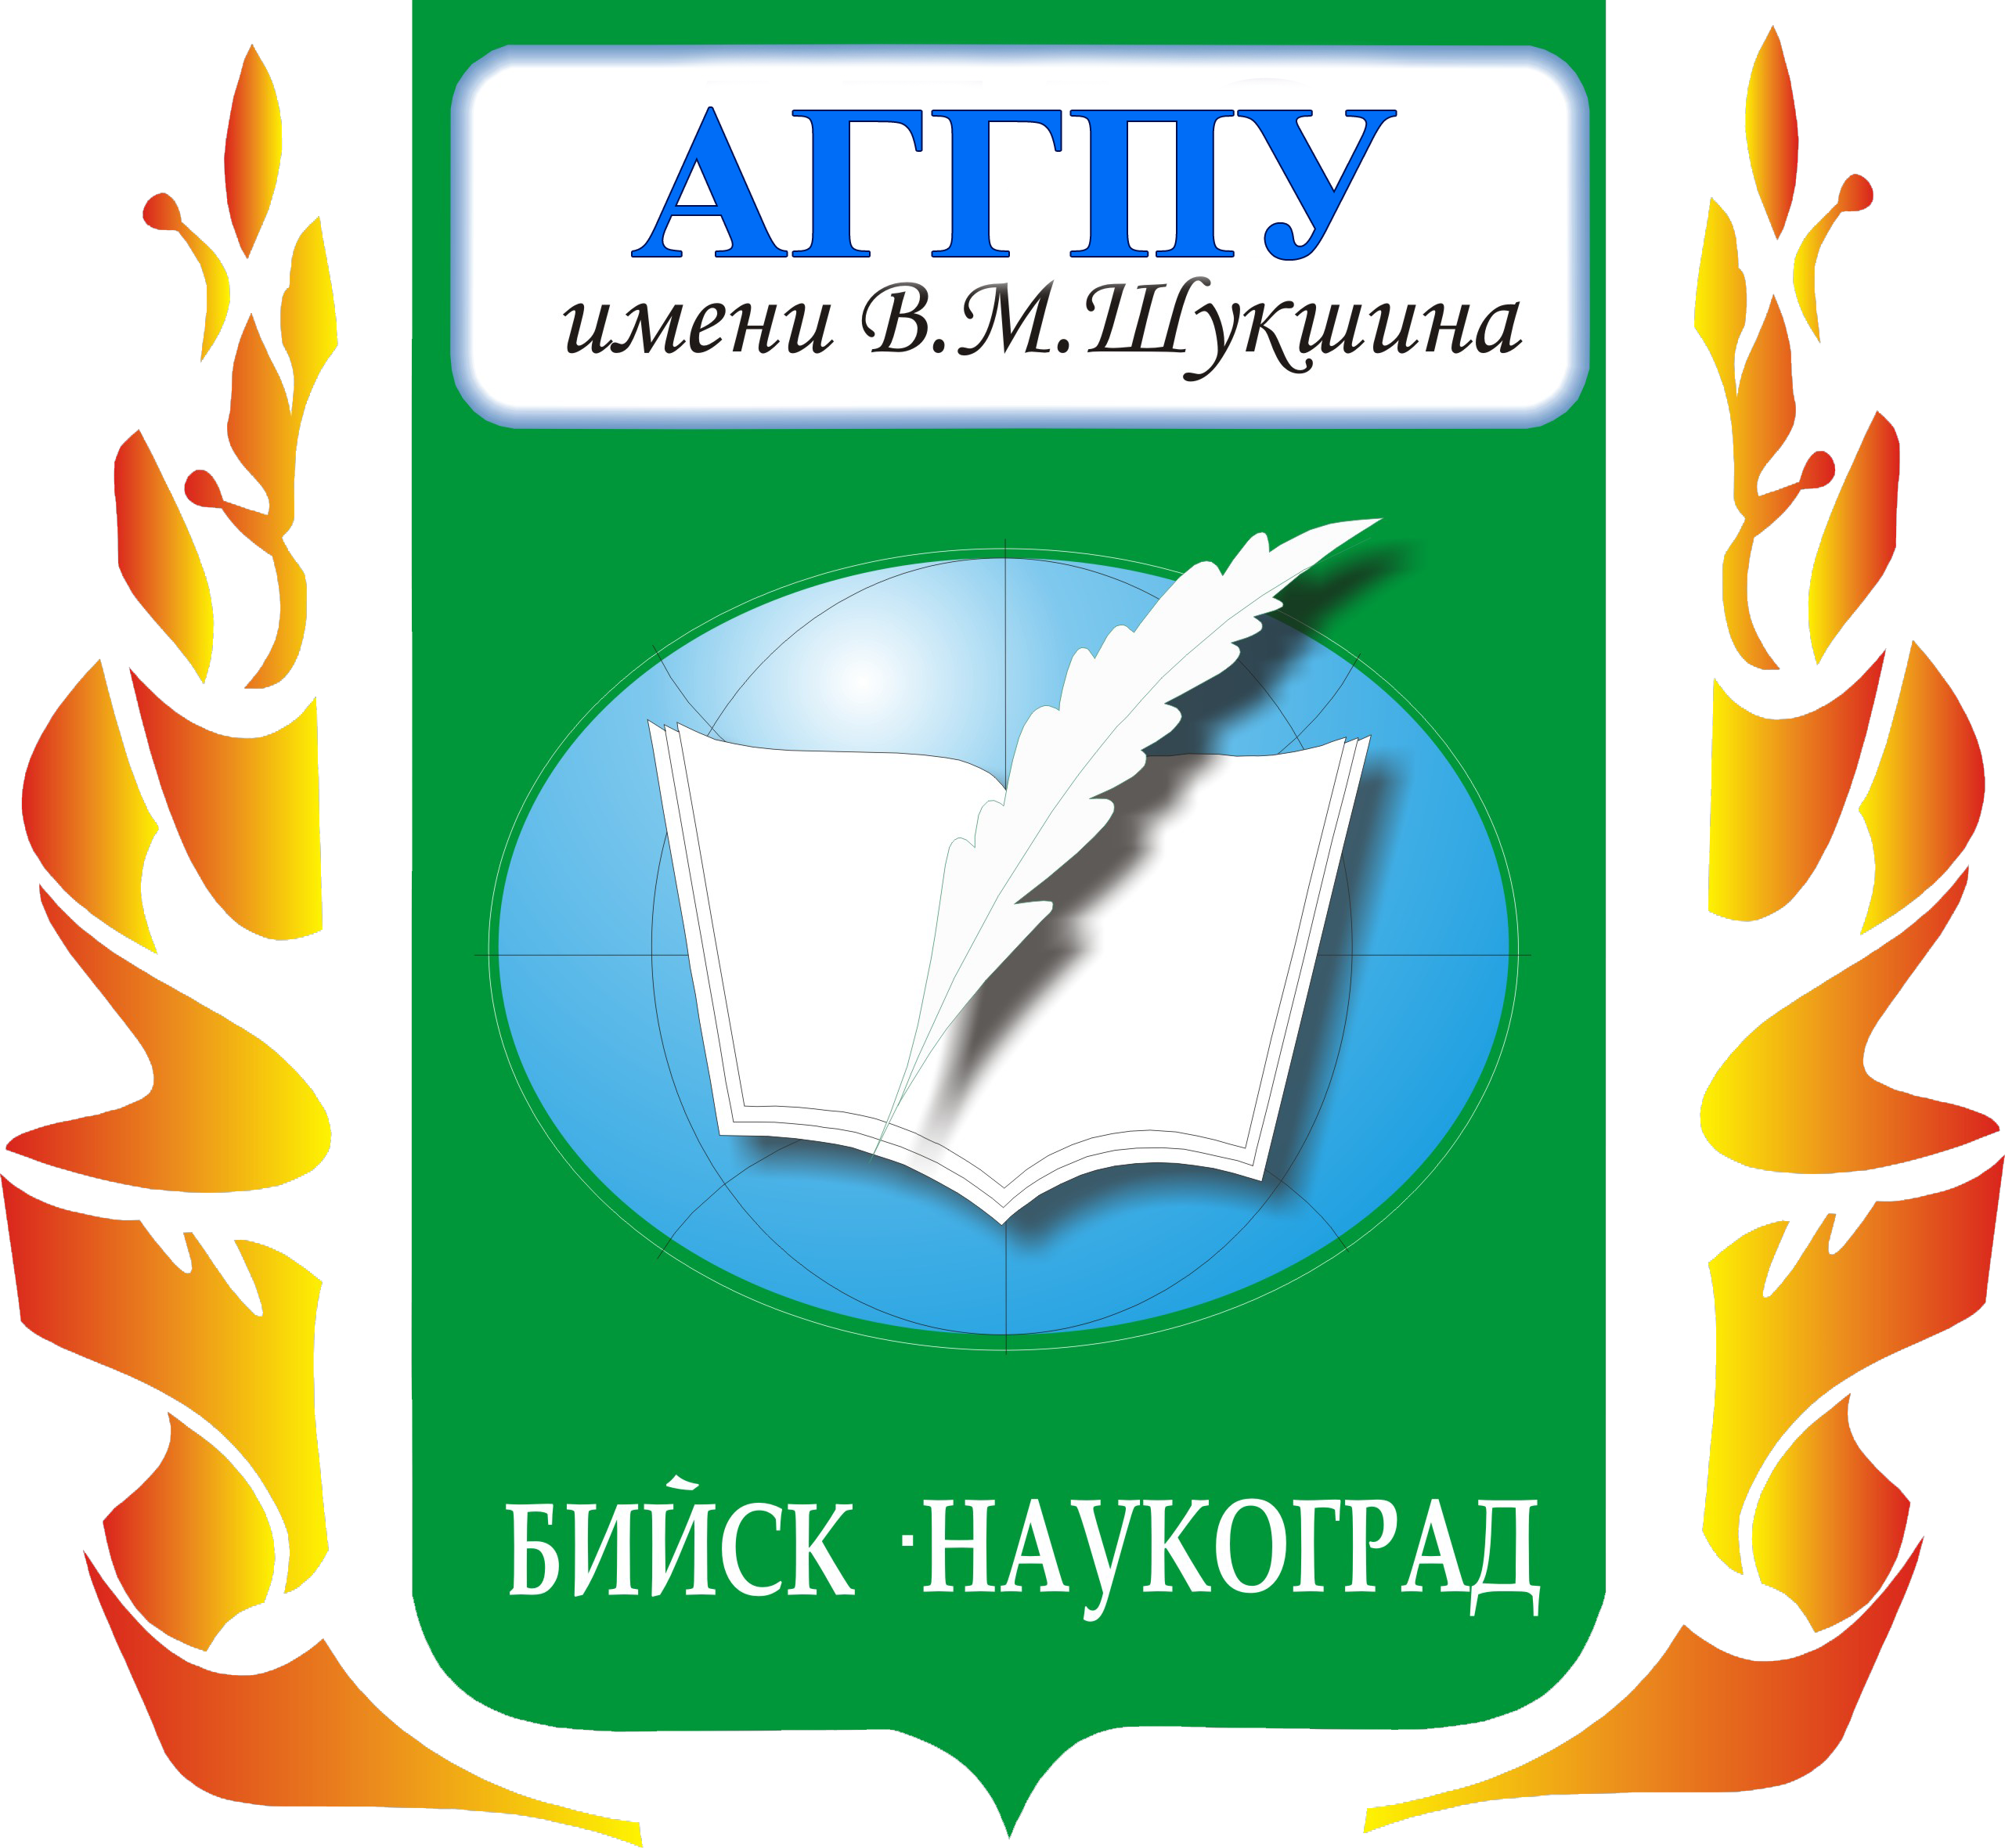 ALTAI STATE HUMANITARIAN PEDAGOGICAL UNIVERSITY NAMED AFTER V.M. SHUKSHIN, RUSSIA